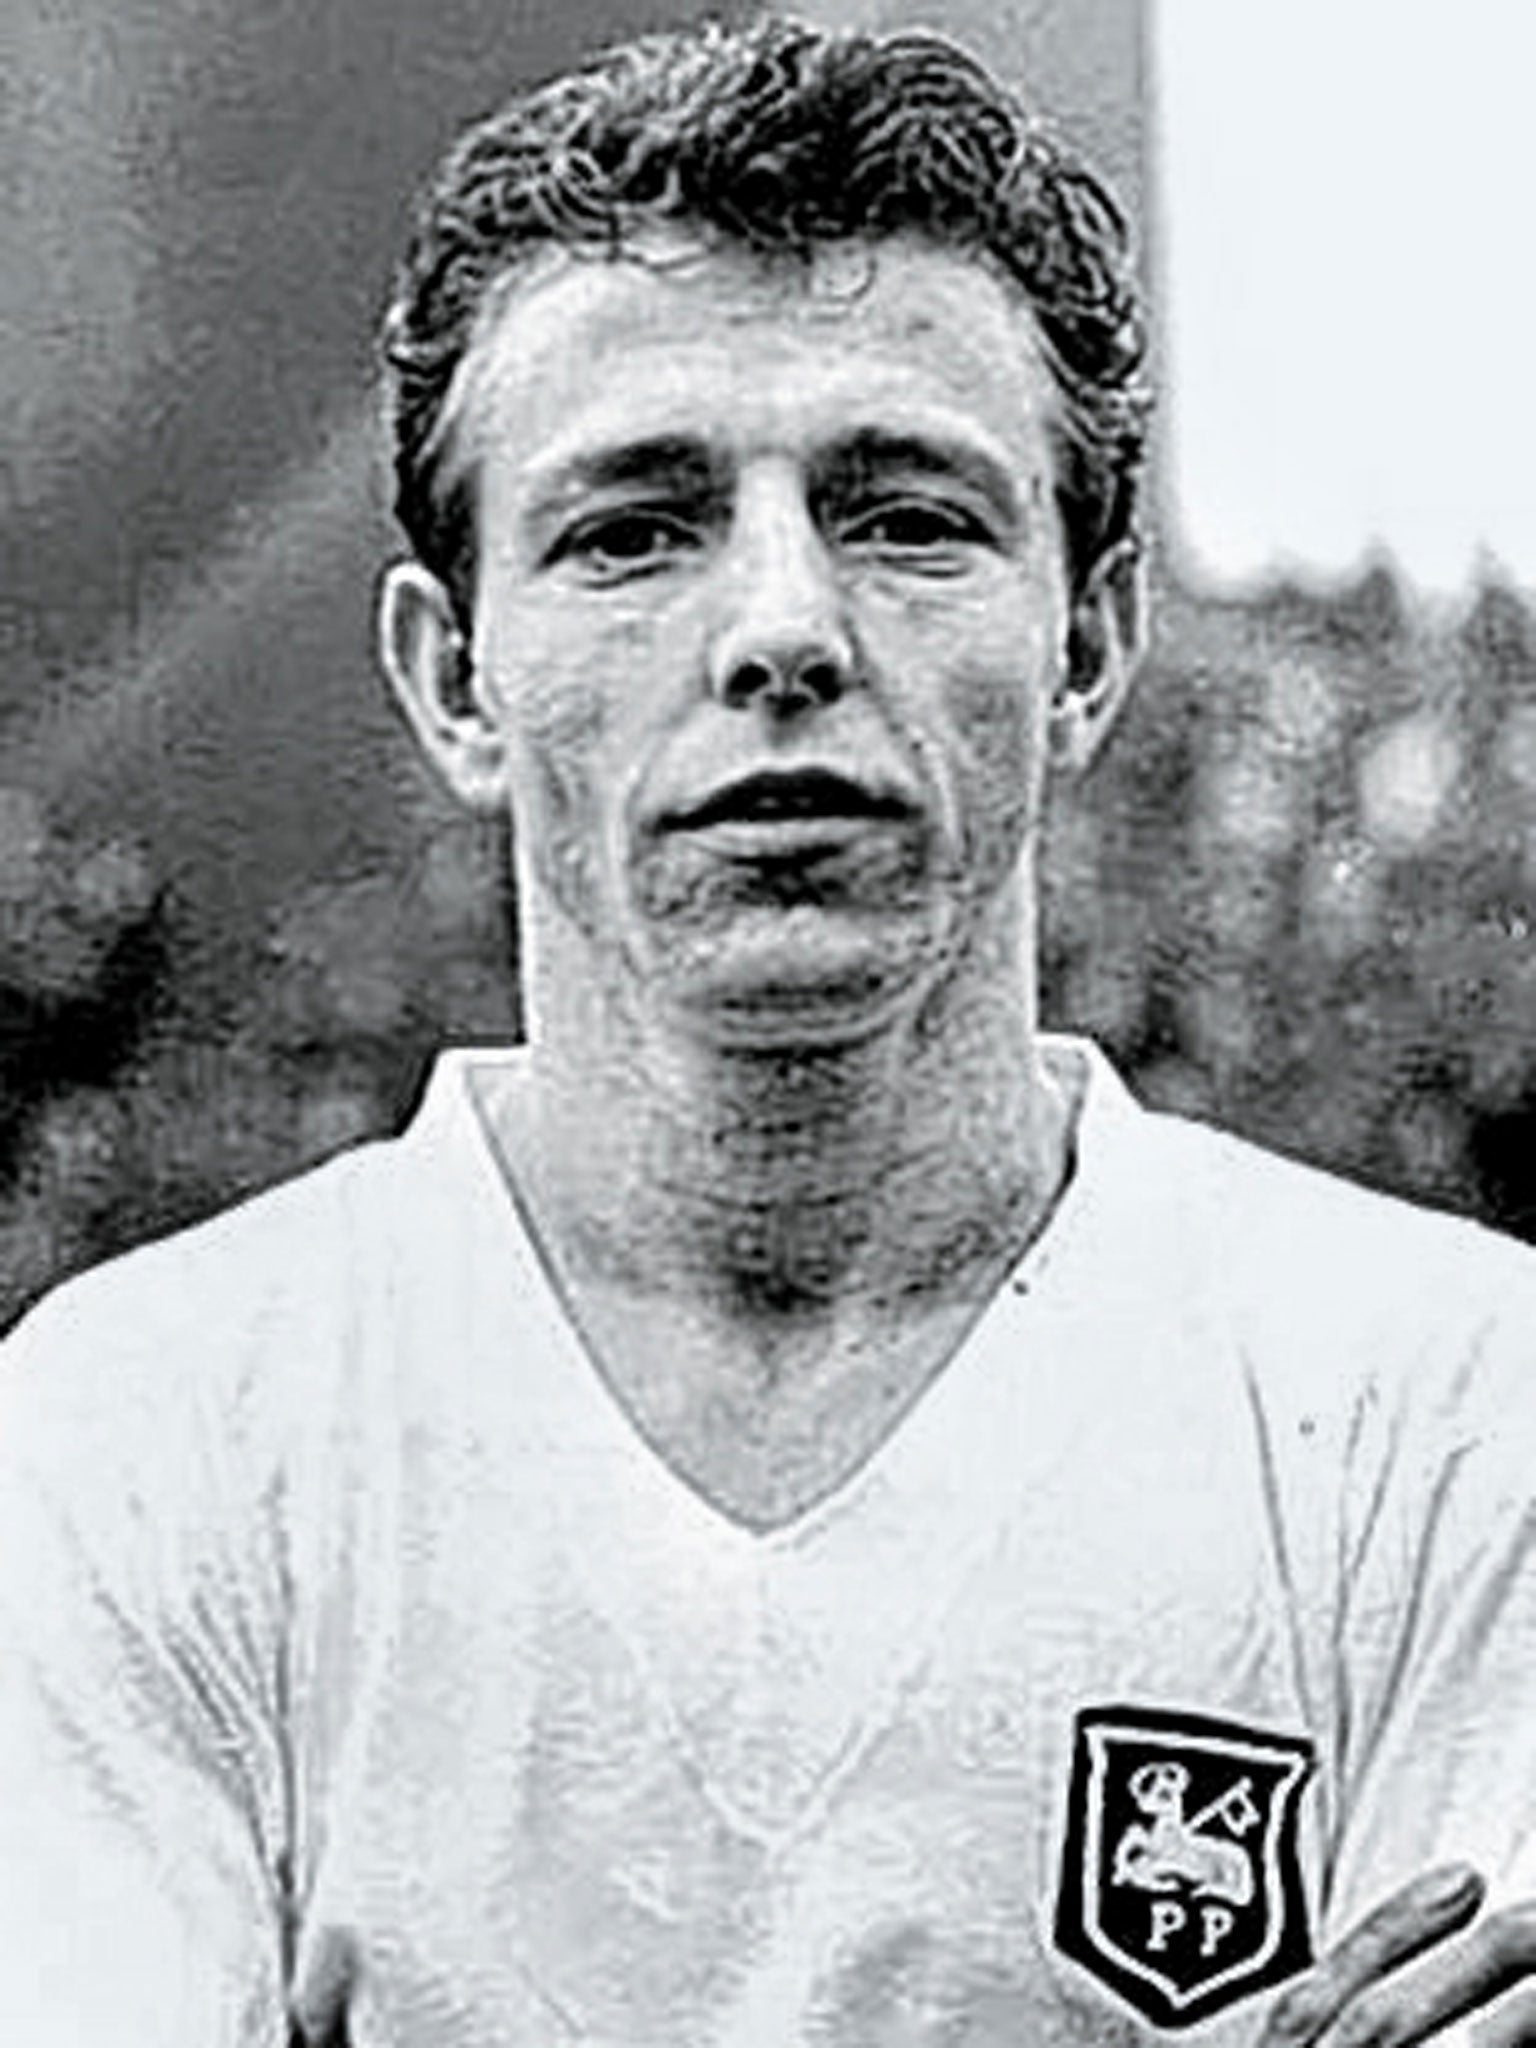 Taylor scored hat-tricks against Portsmouth, Chelsea, and Birmingham City